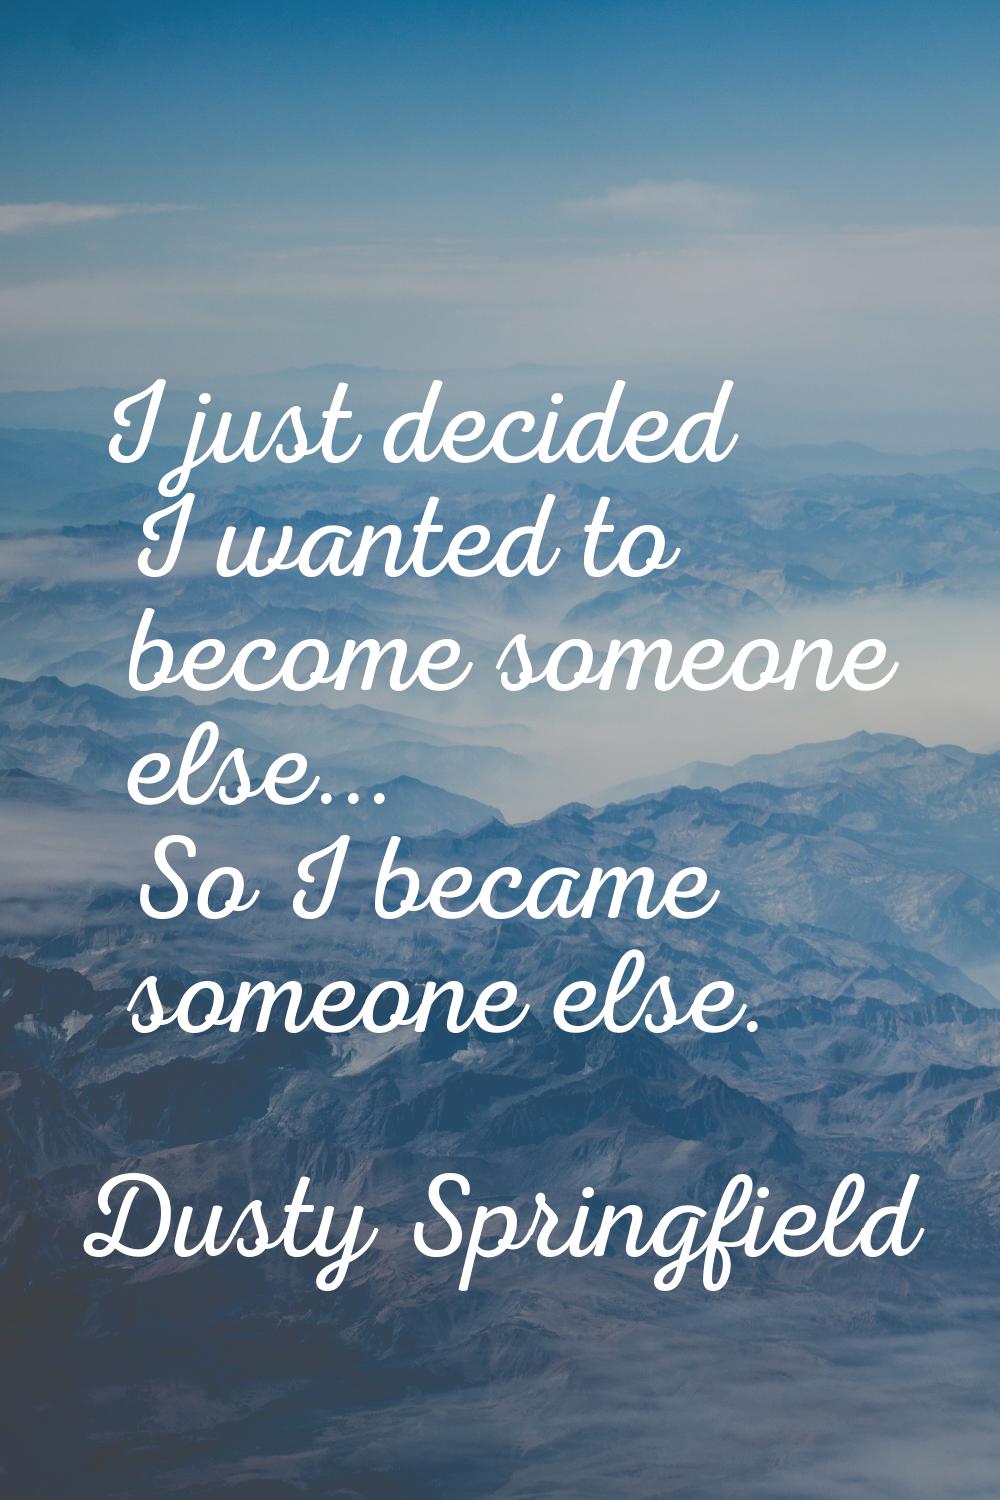 I just decided I wanted to become someone else... So I became someone else.